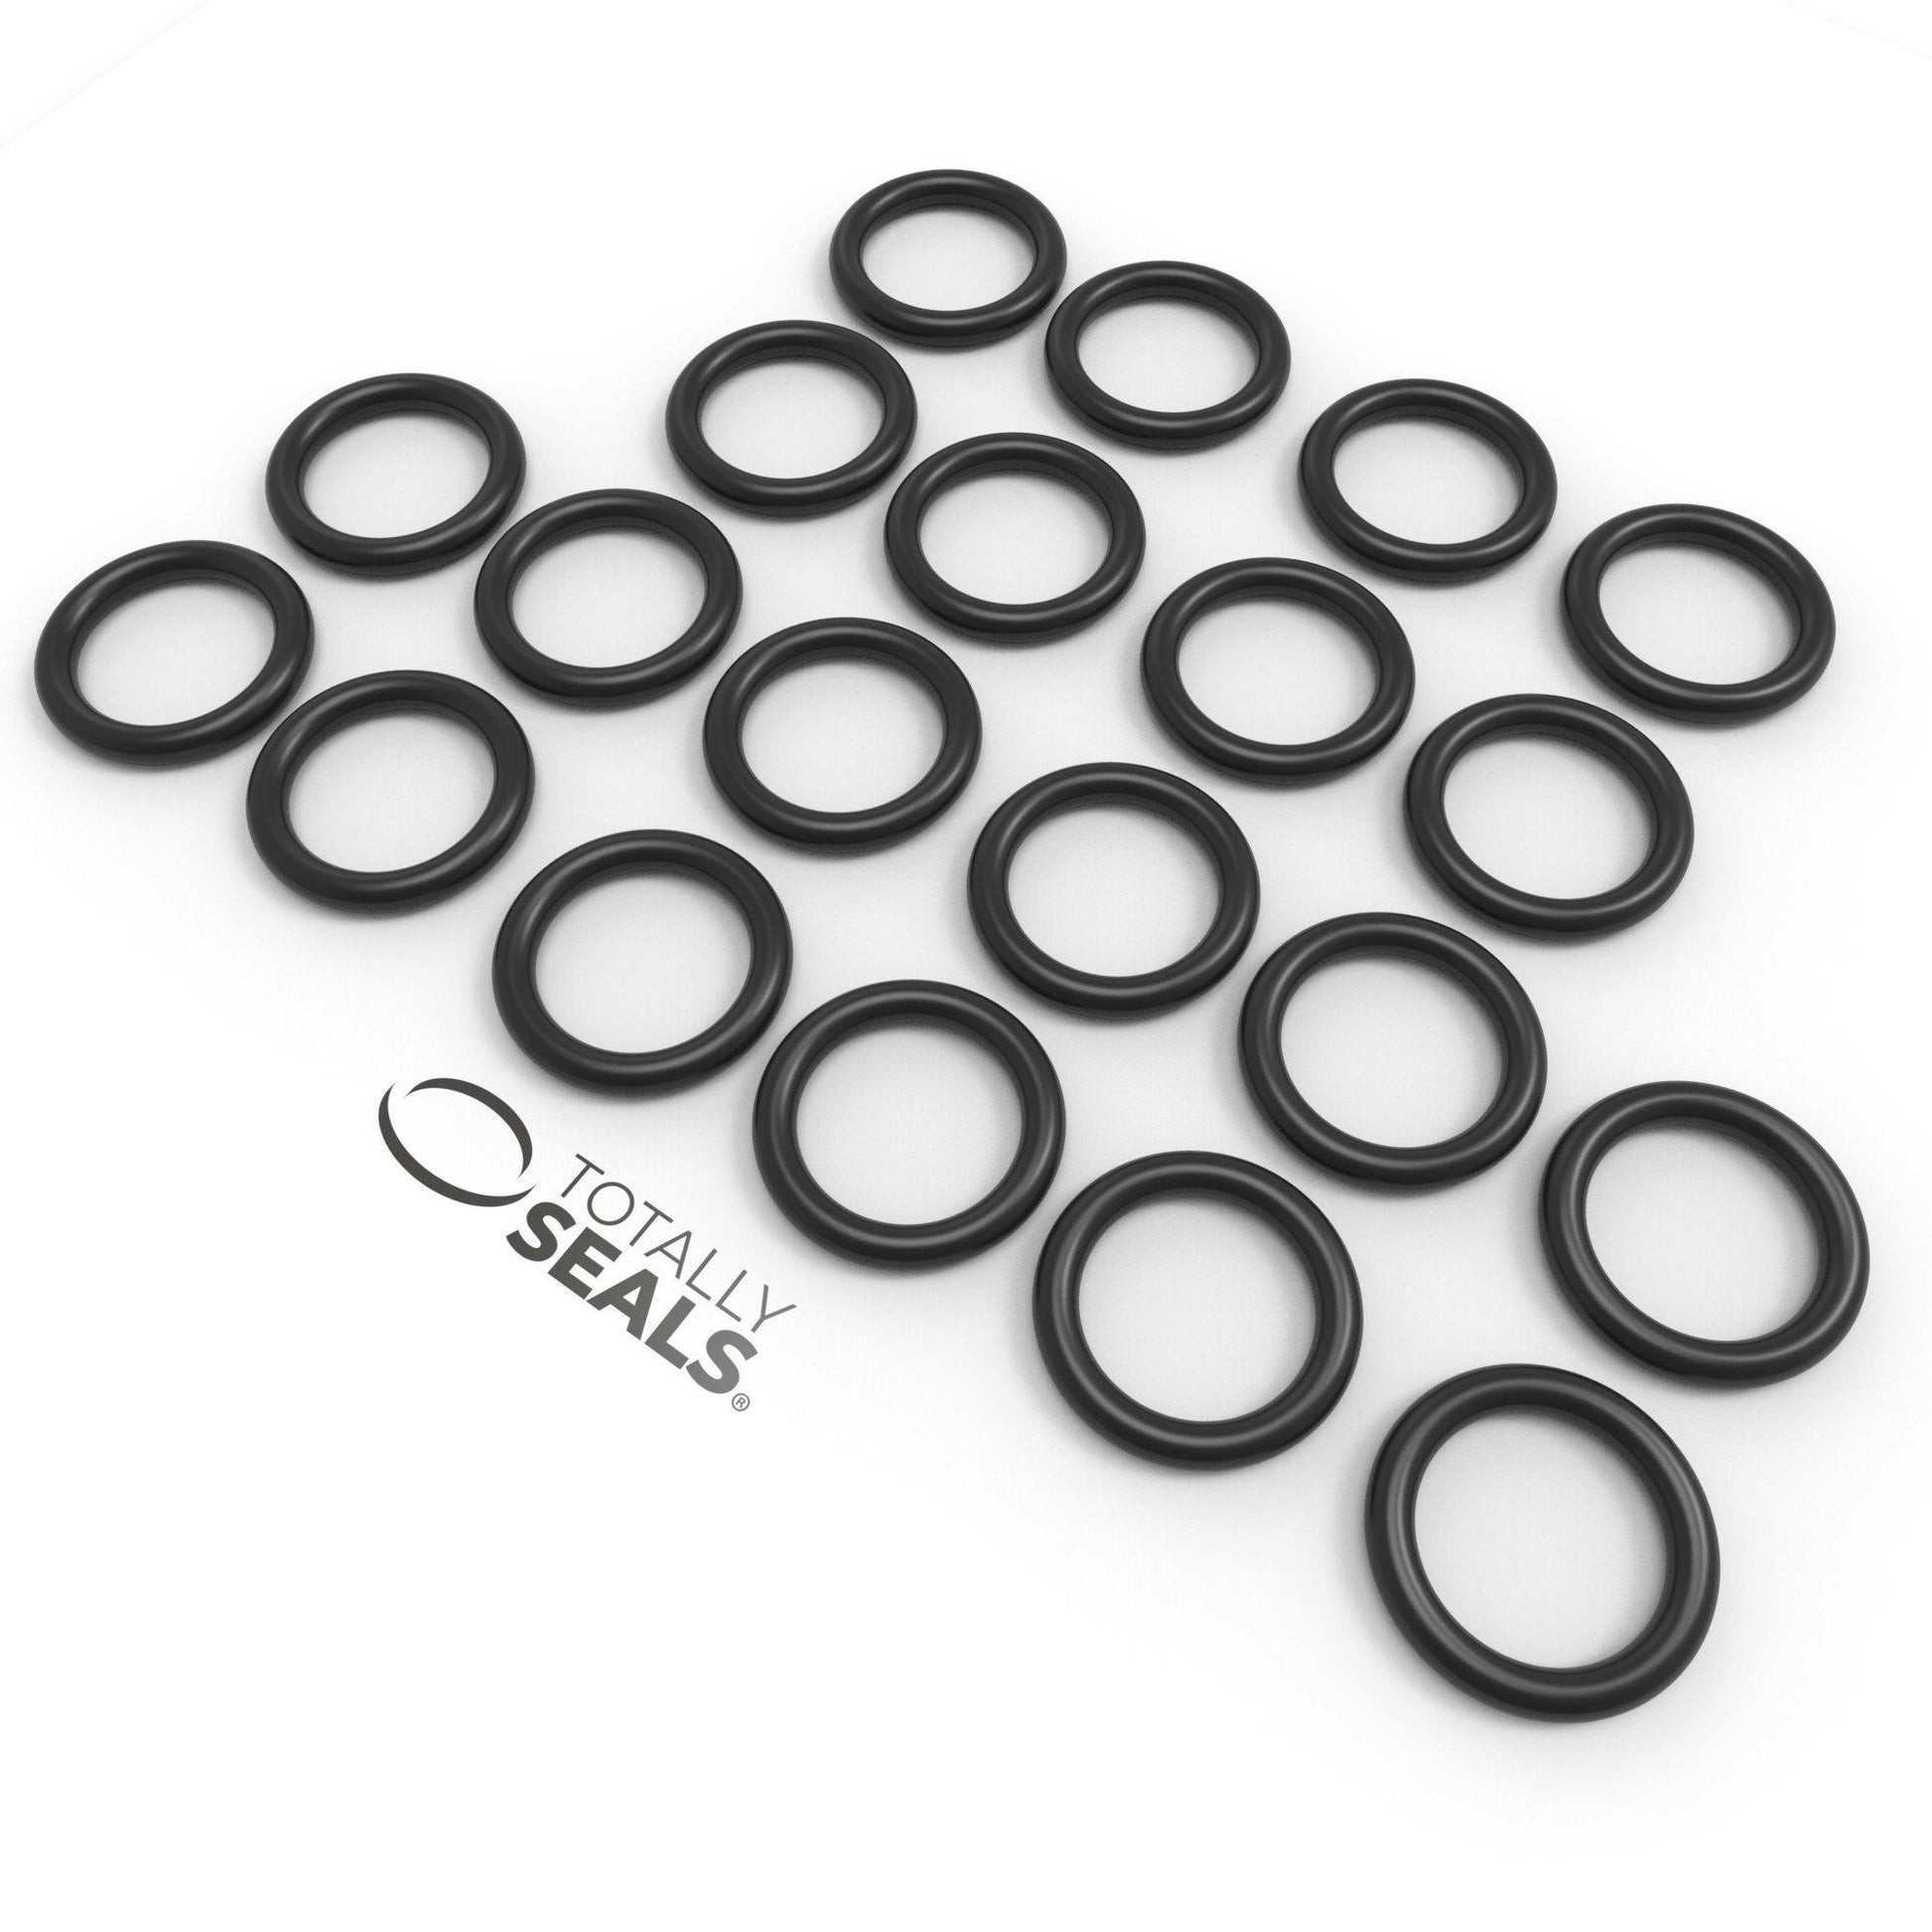 23mm x 1mm (25mm OD) Nitrile O-Rings - Totally Seals®